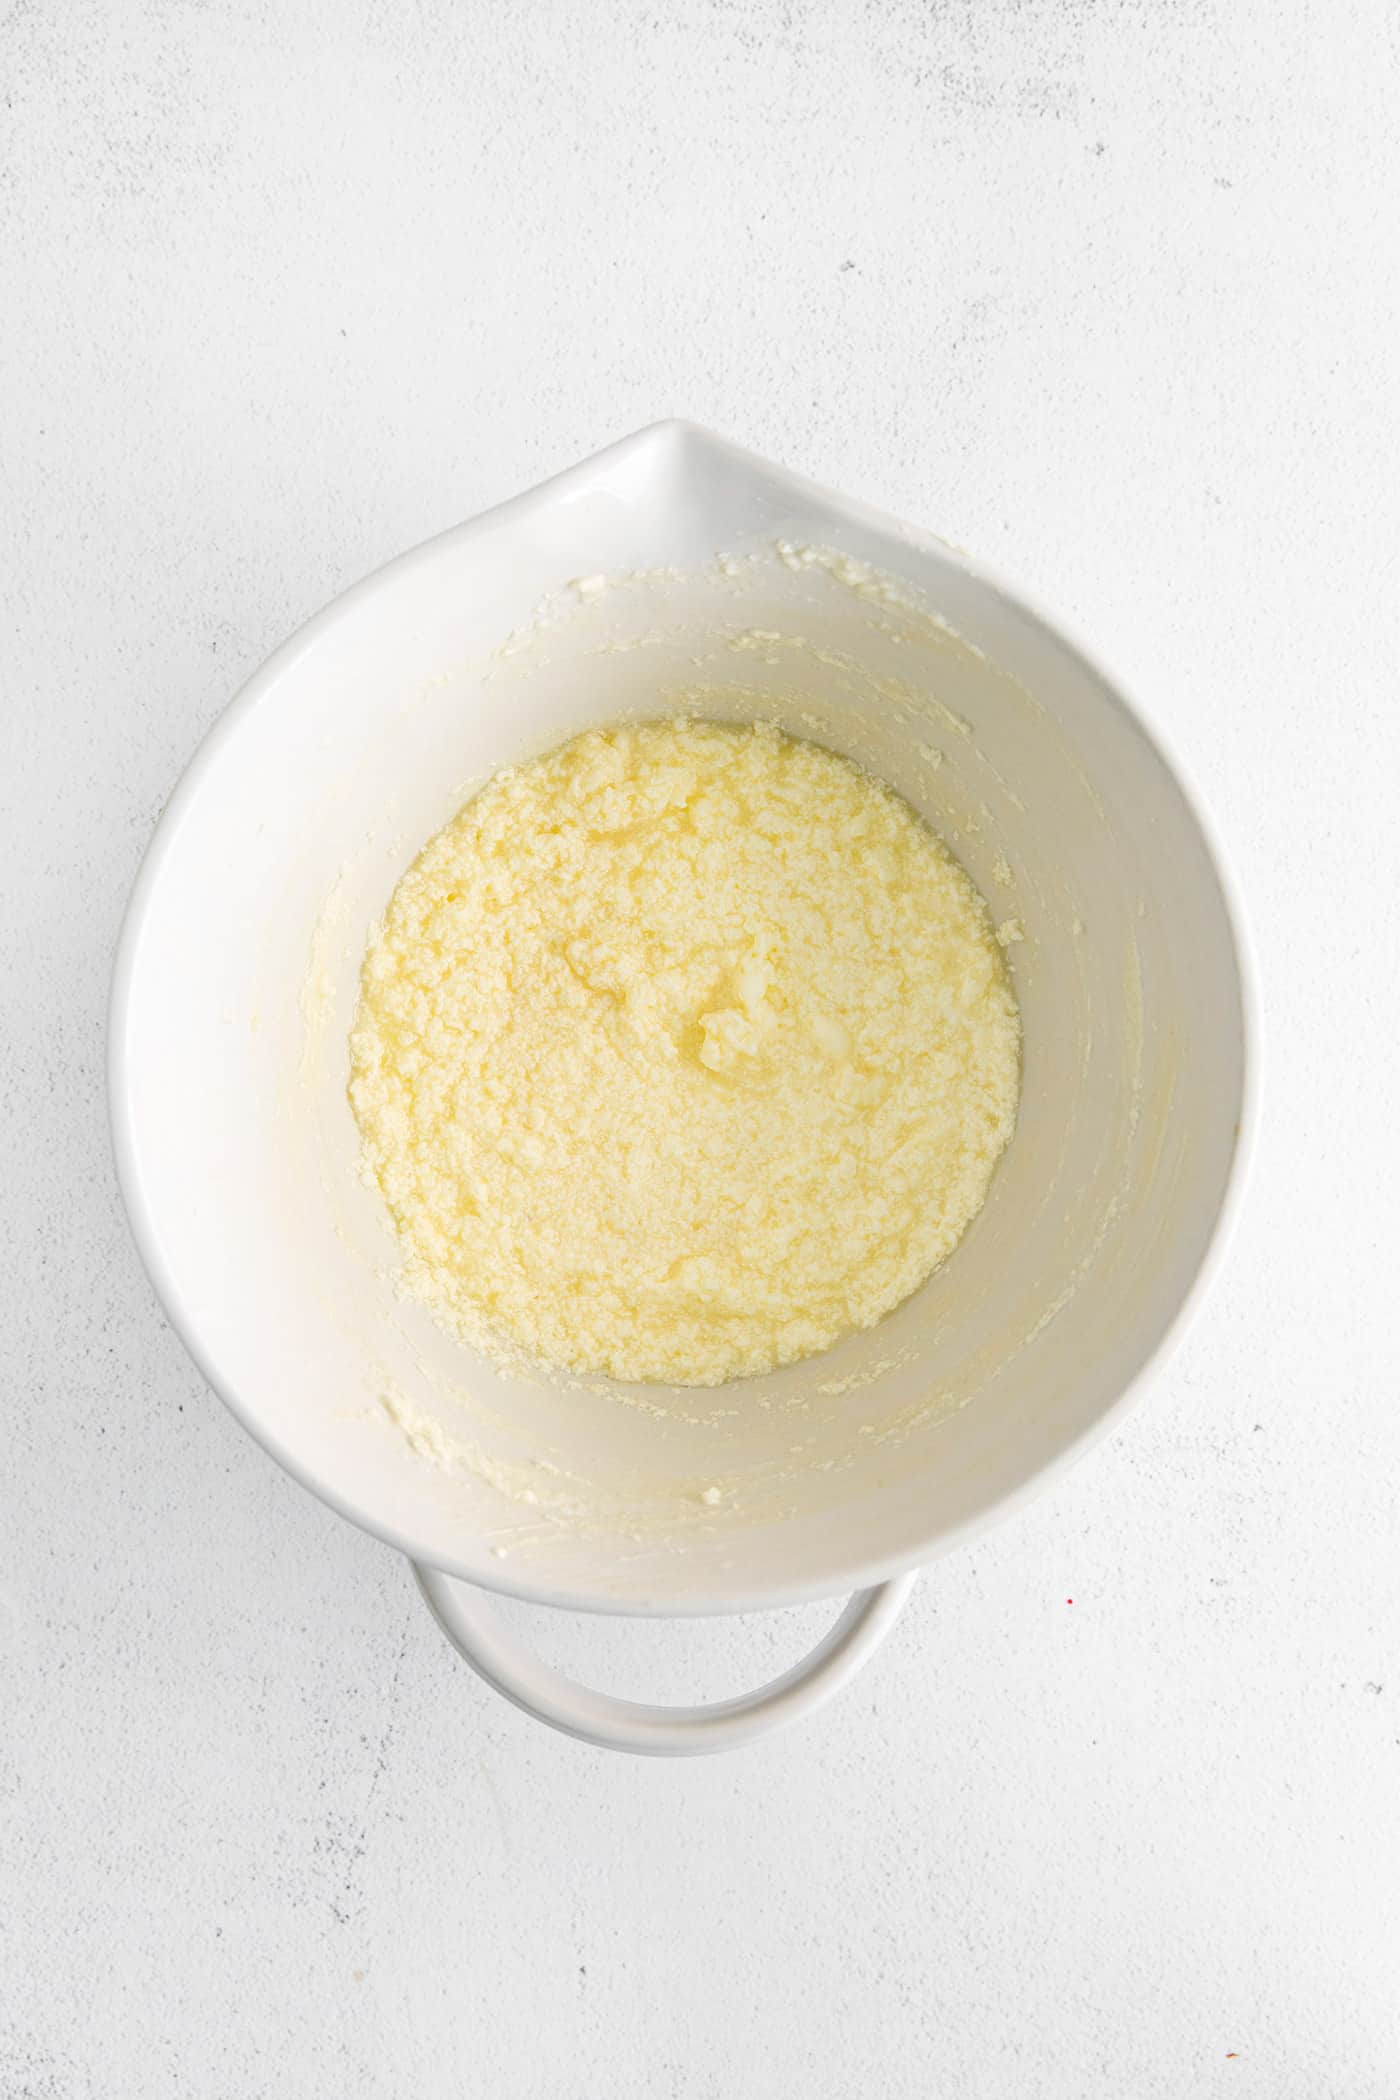 Whipped butter and sugar in a mixing bowl